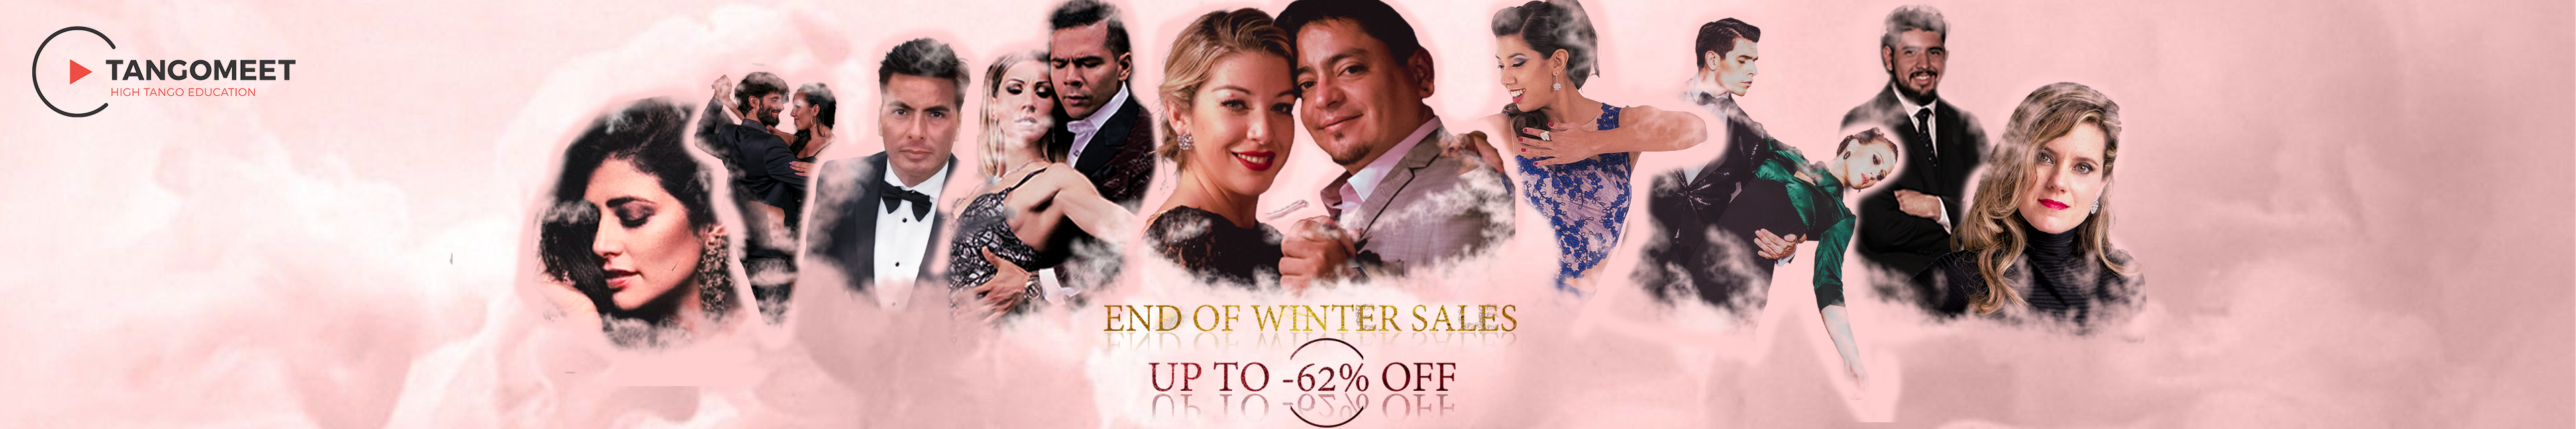 End of winter sales UP TO -62% off